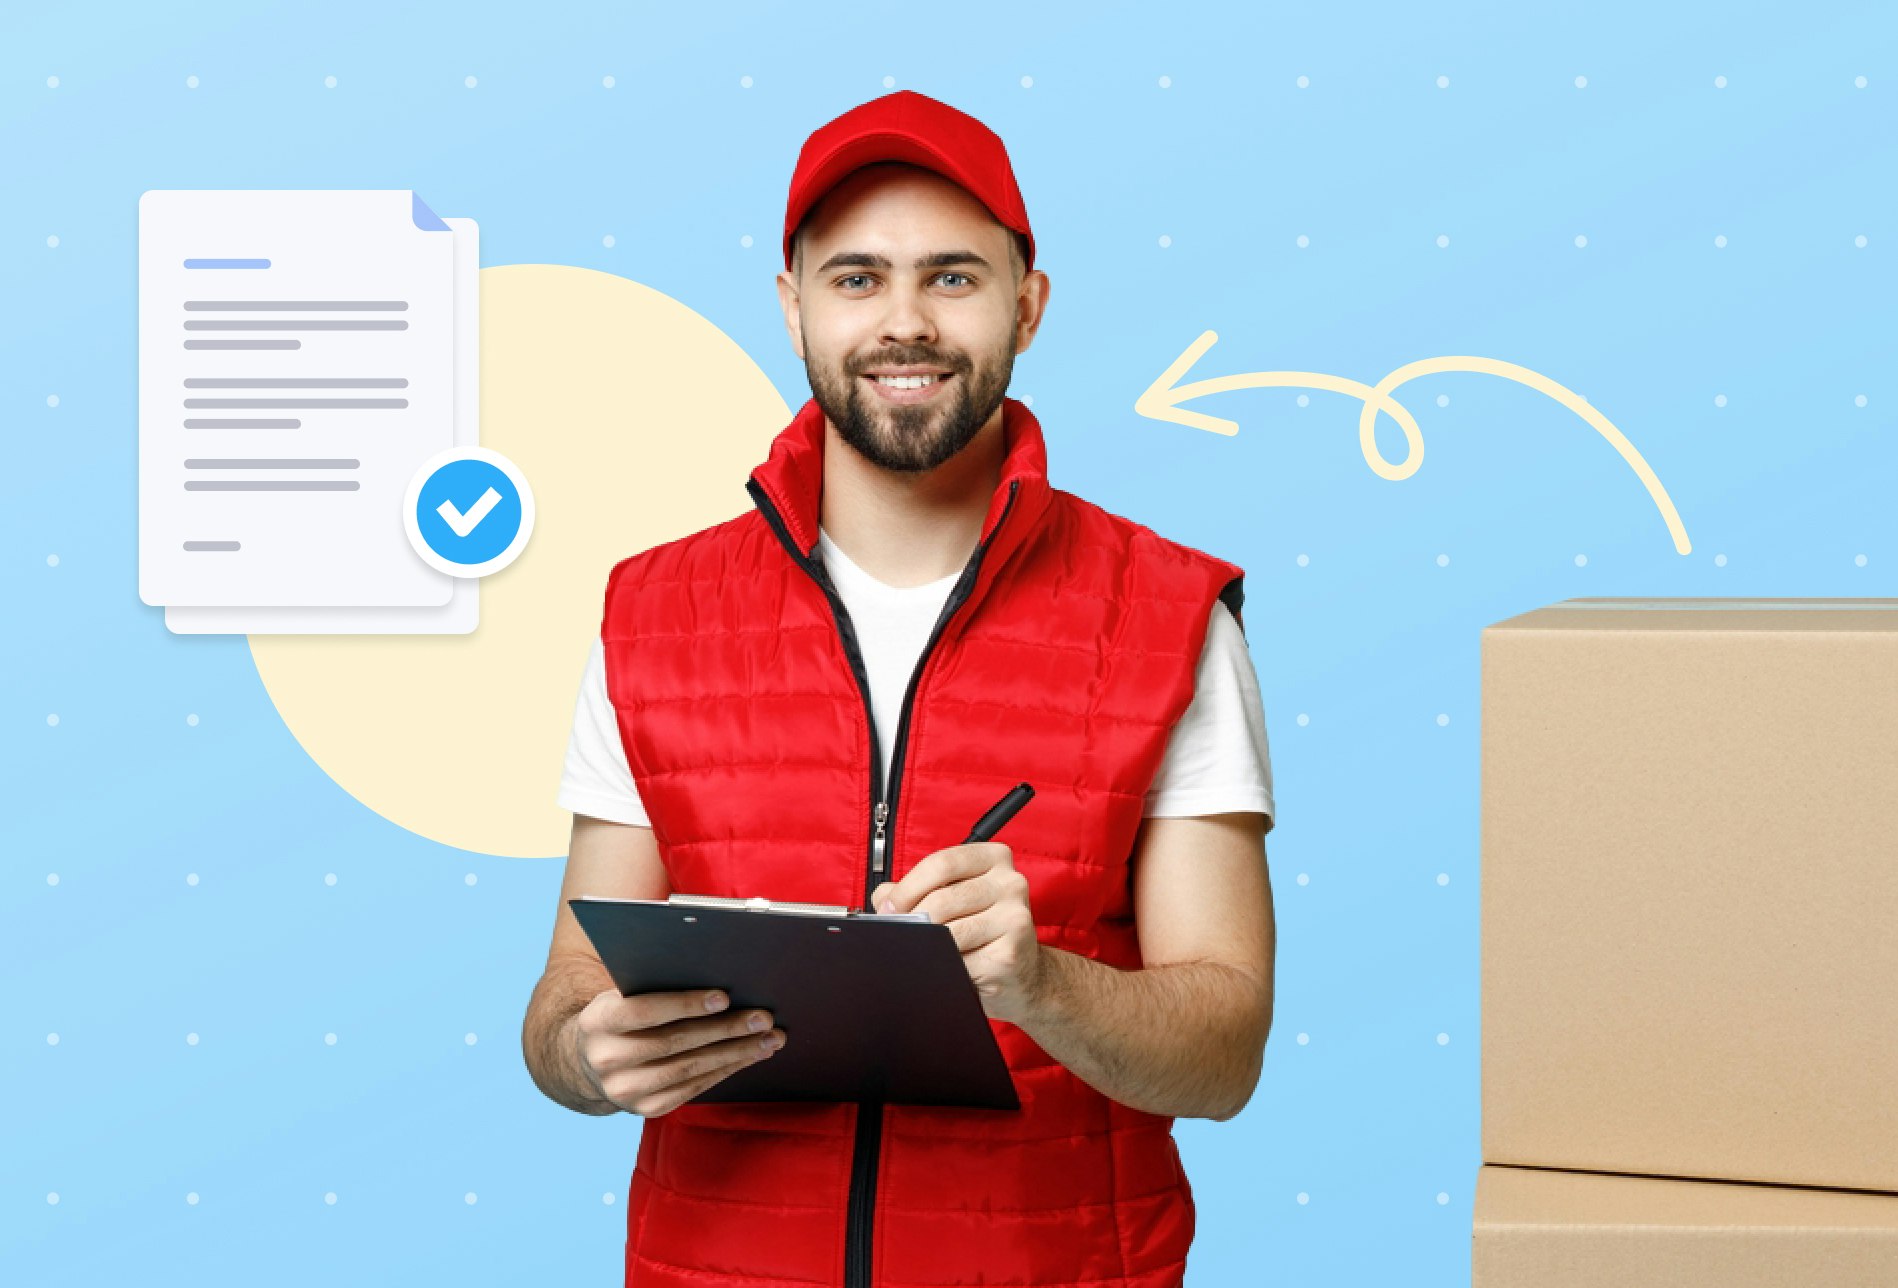 A delivery driver in a red top and cap. He has a beard, is smiling, and writing on a clipboard with a black pen. The image suggests the driver is at a customer's door with a package for them to sign for.